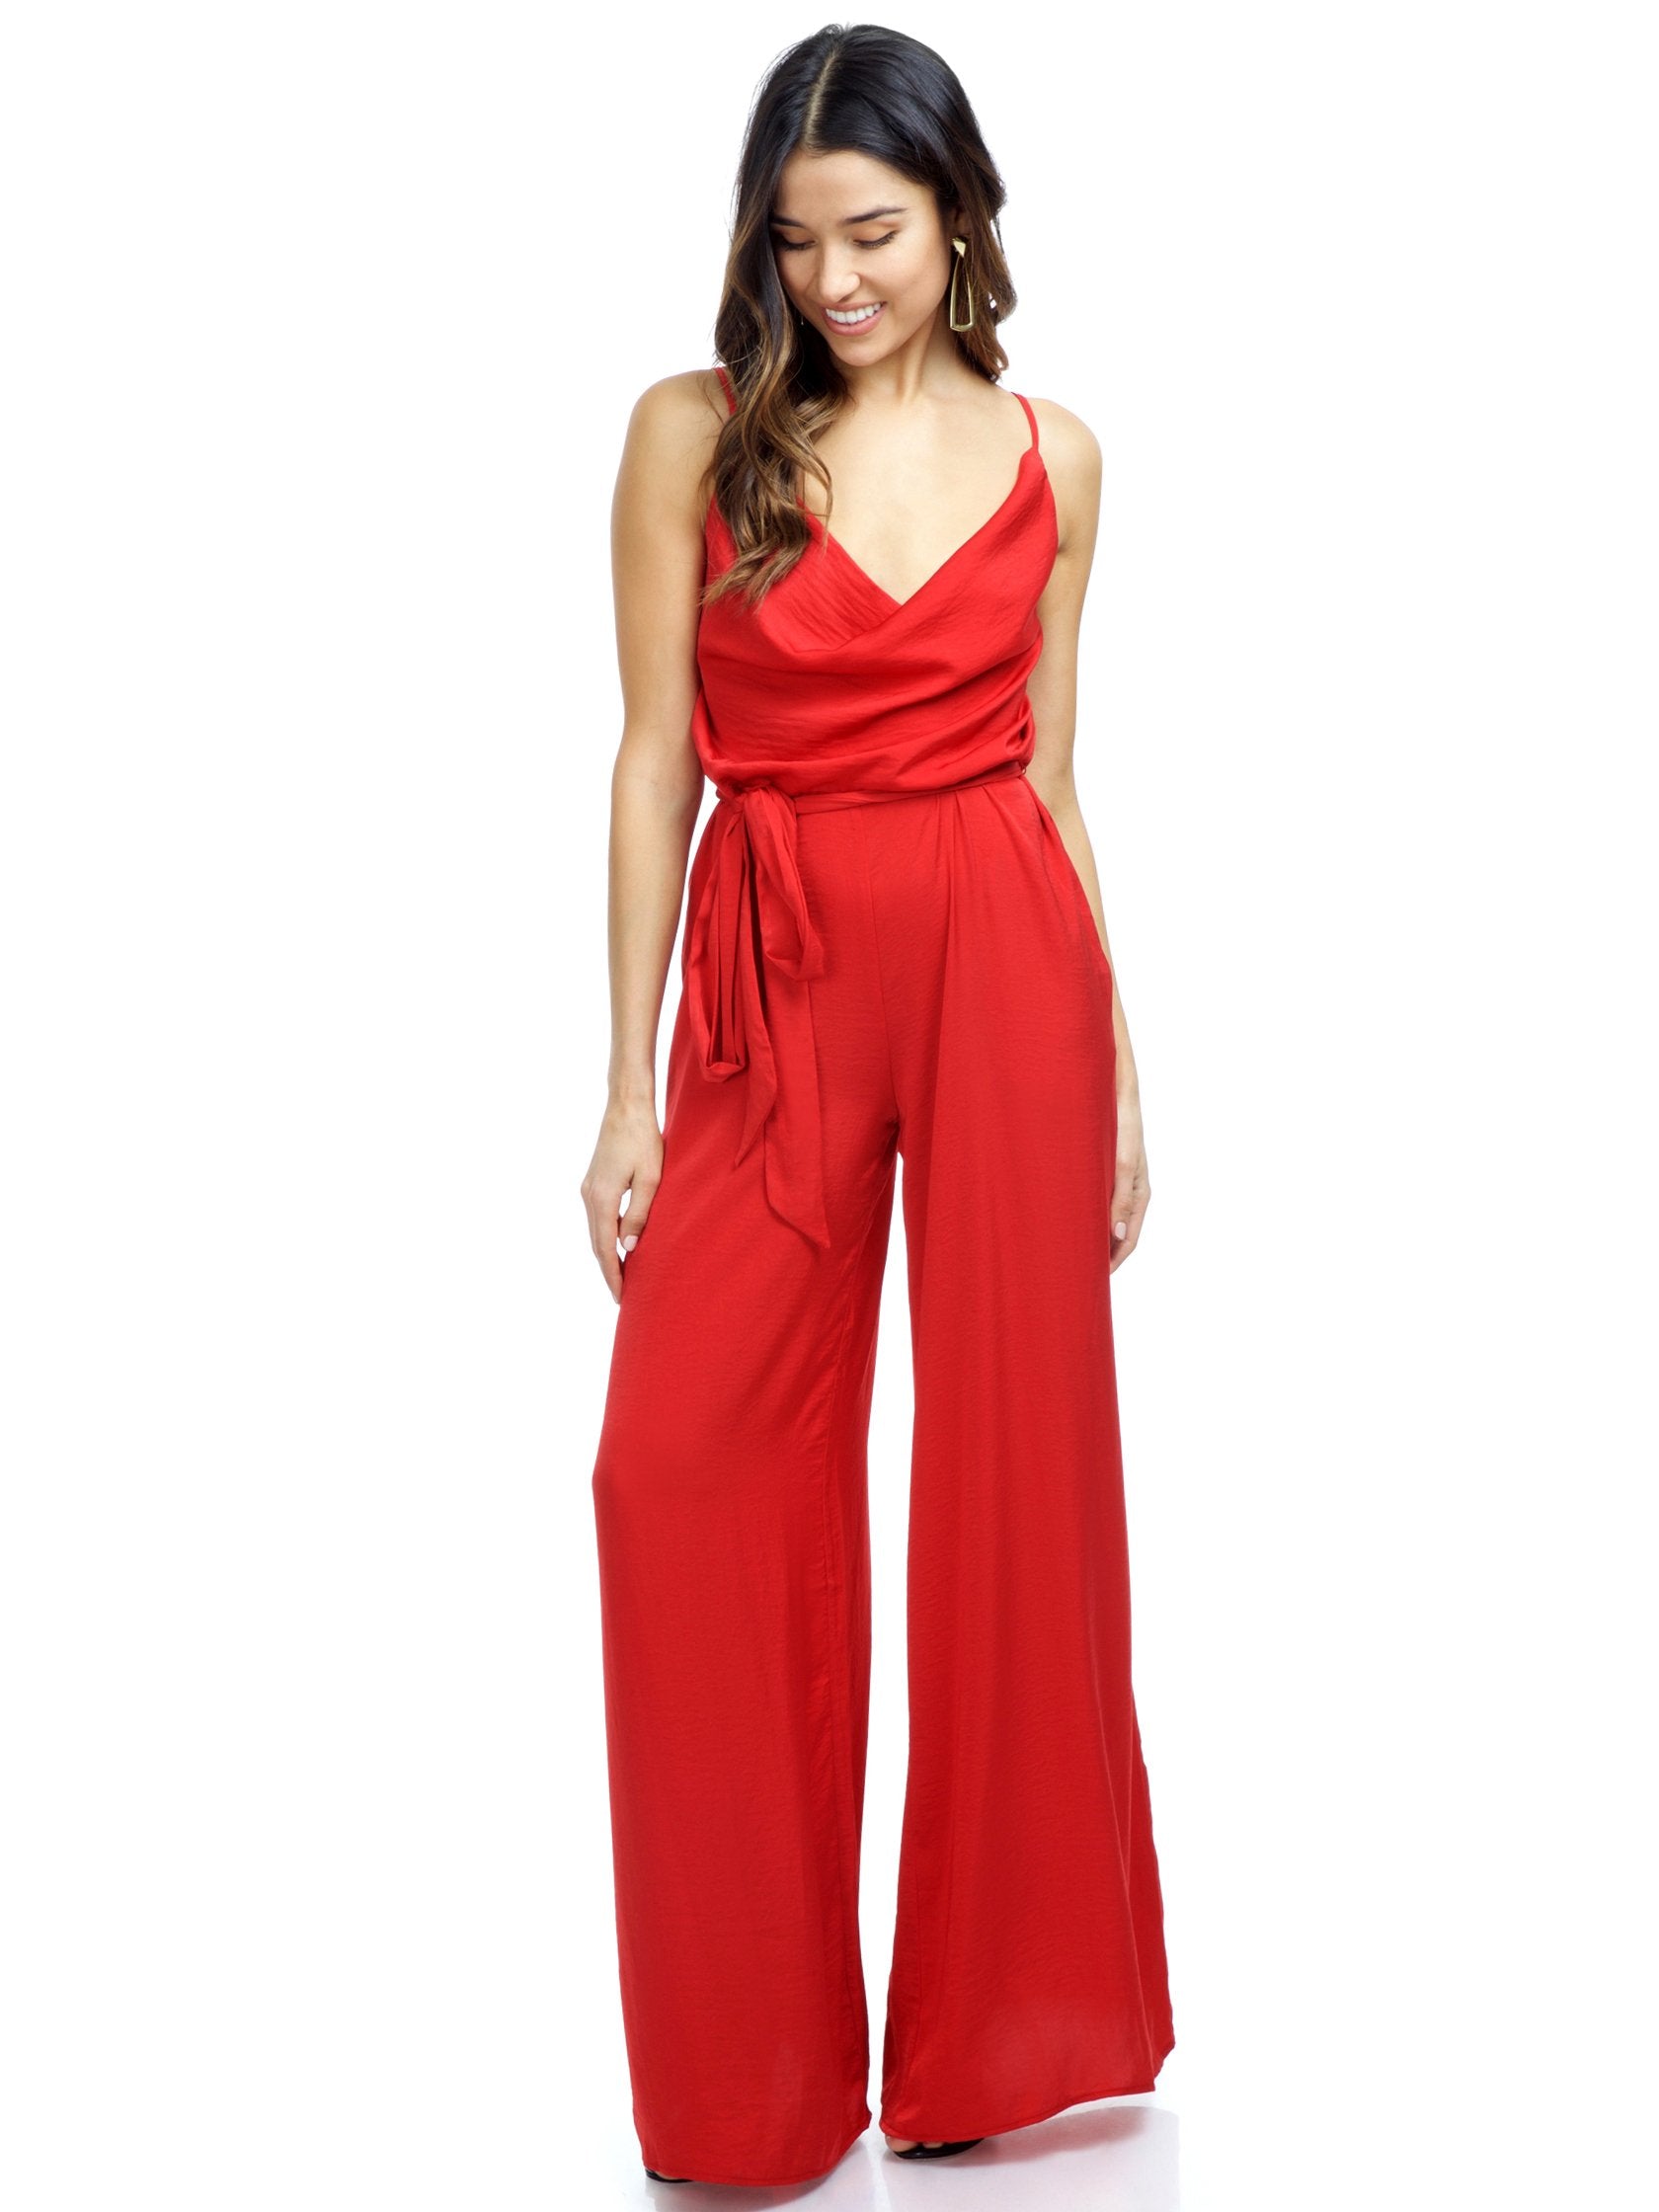 Girl outfit in a jumpsuit rental from The Jetset Diaries called Ellil Jumpsuit